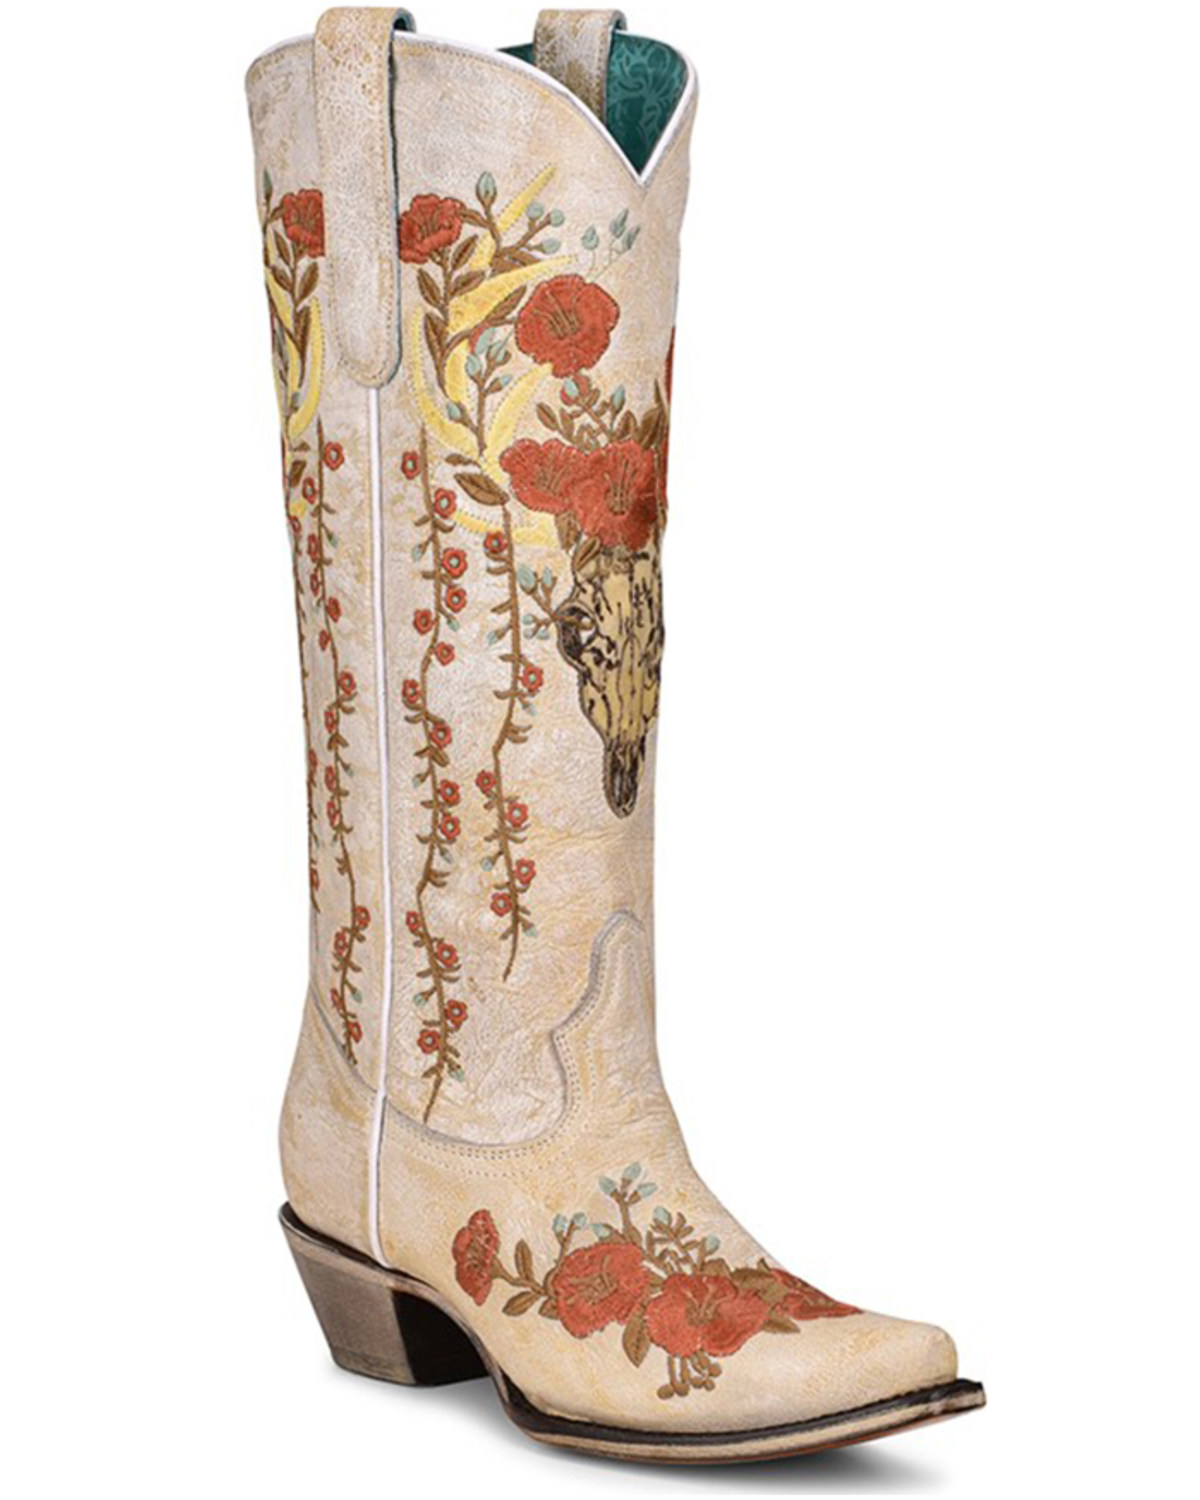 Corral Women's Floral & Deer Embroidered Western Boots - Snip Toe